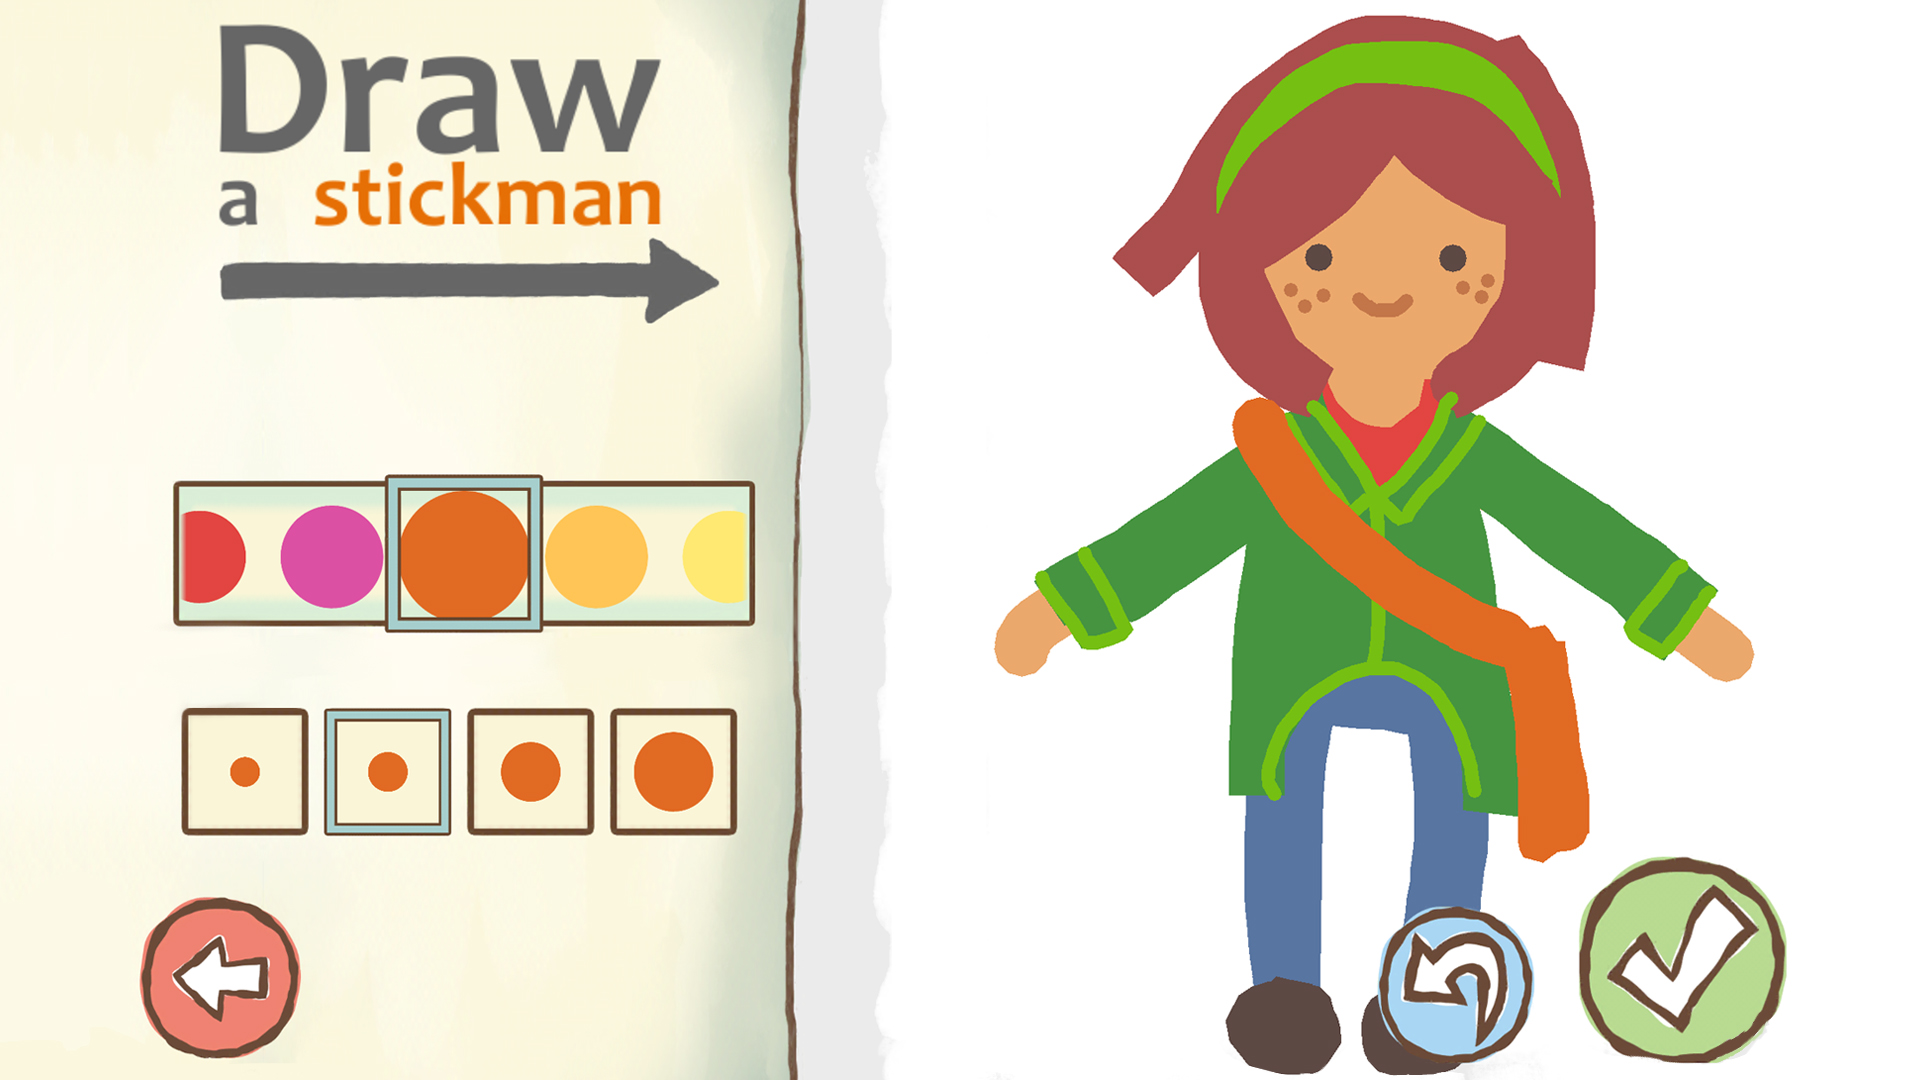 Draw a Stickman: EPIC Free download the last version for ios